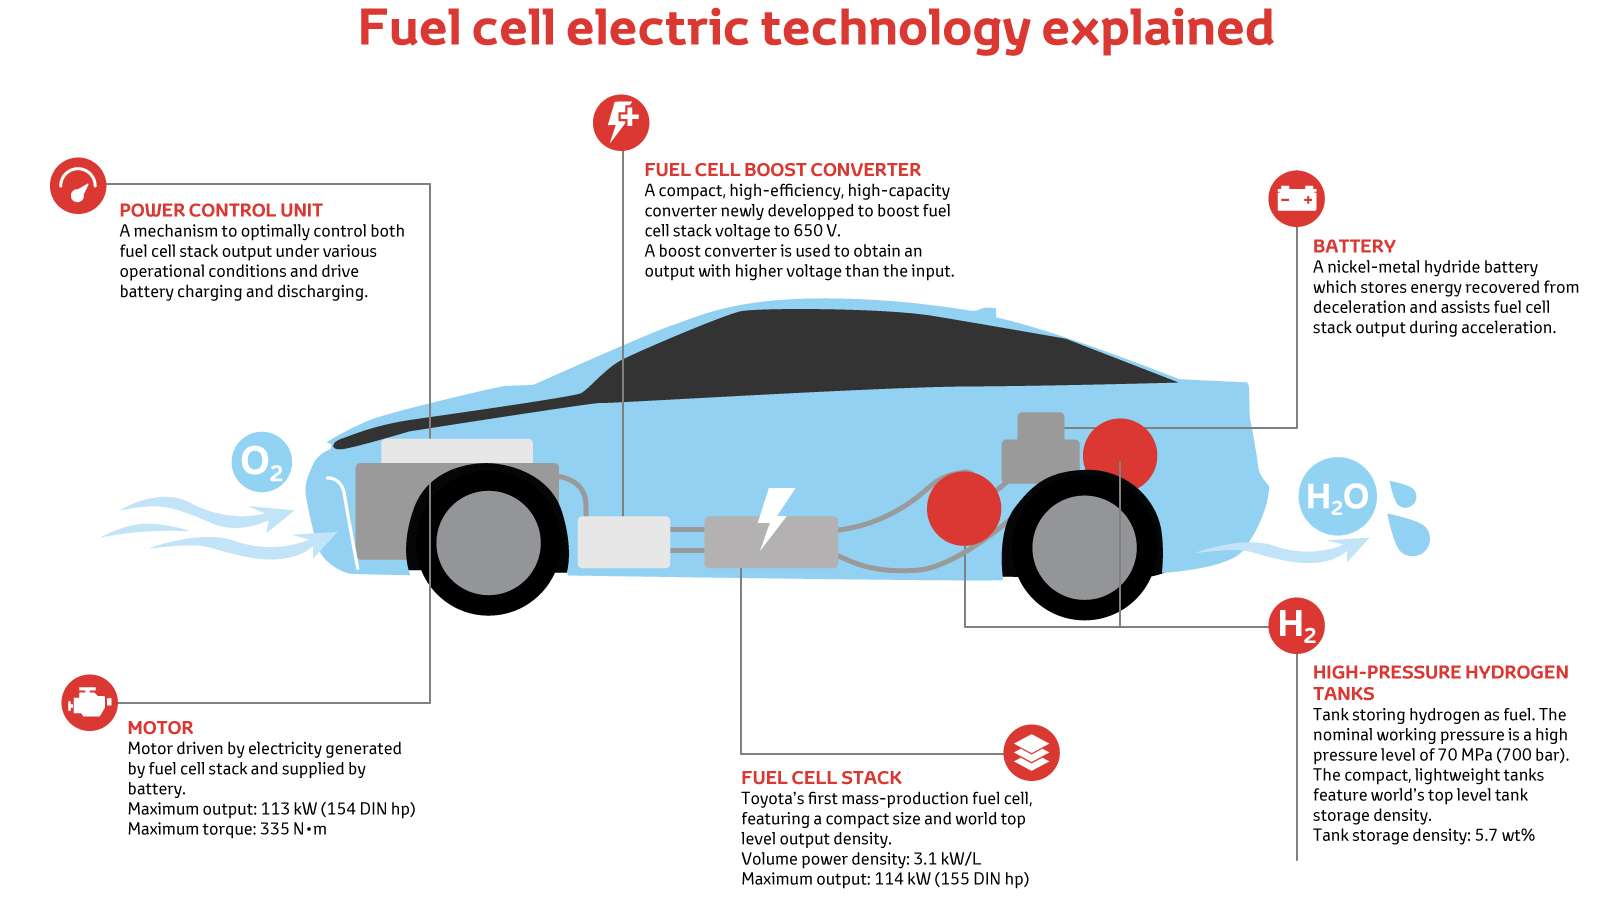 Are Hydrogen Fuel Cells The Future of Transport?